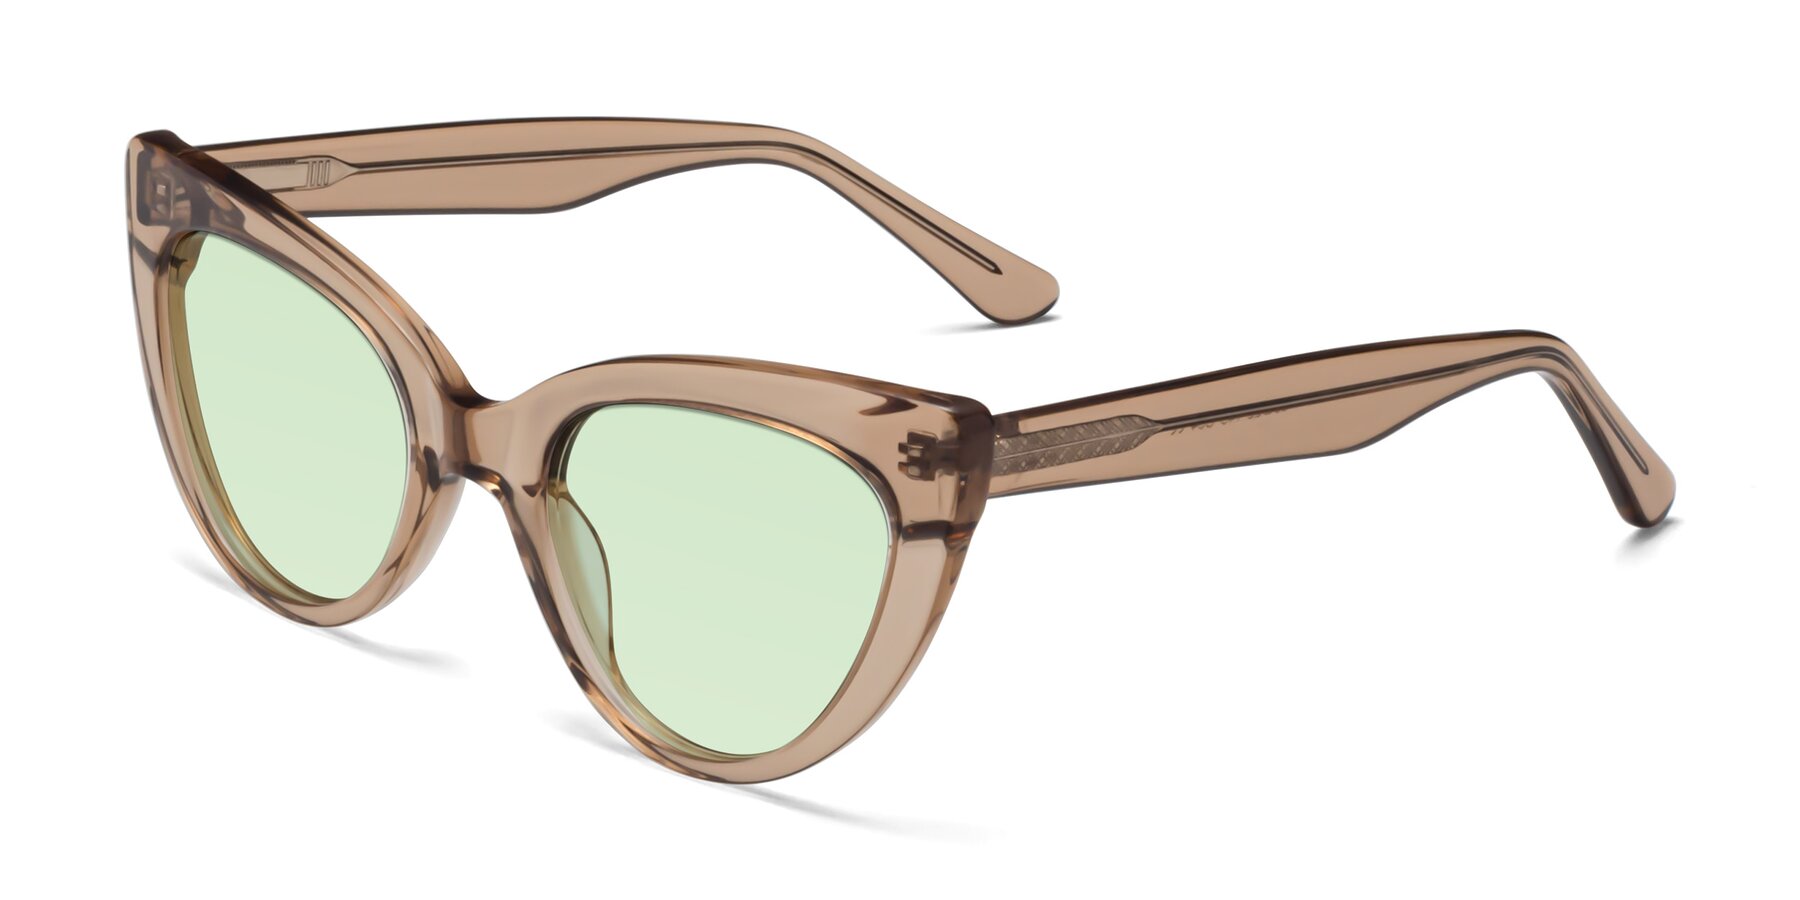 Angle of Tiesi in Caramel with Light Green Tinted Lenses